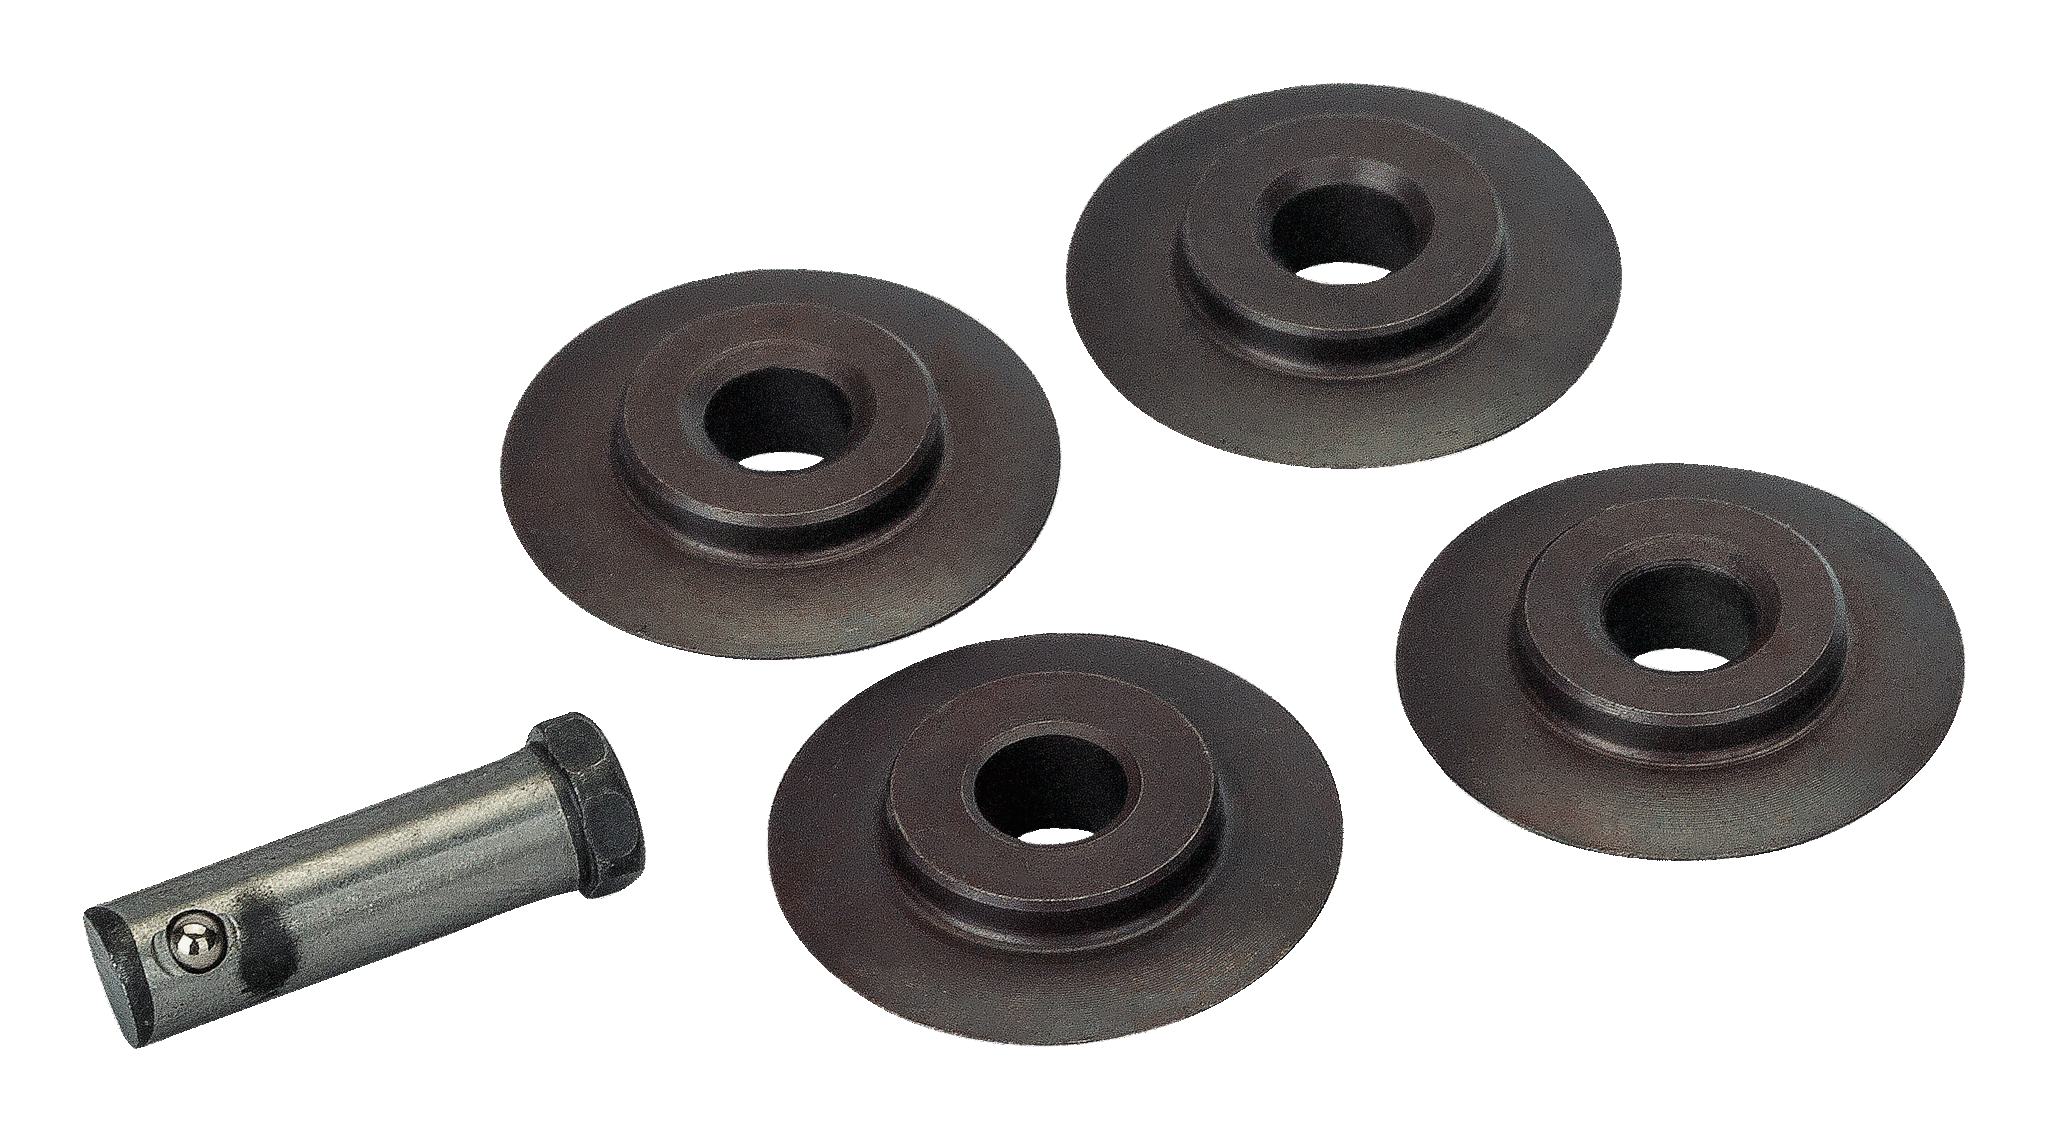 Spare Wheel Set and Pin for 301/302 Pipe Cutters 302-95-SET by Bahco